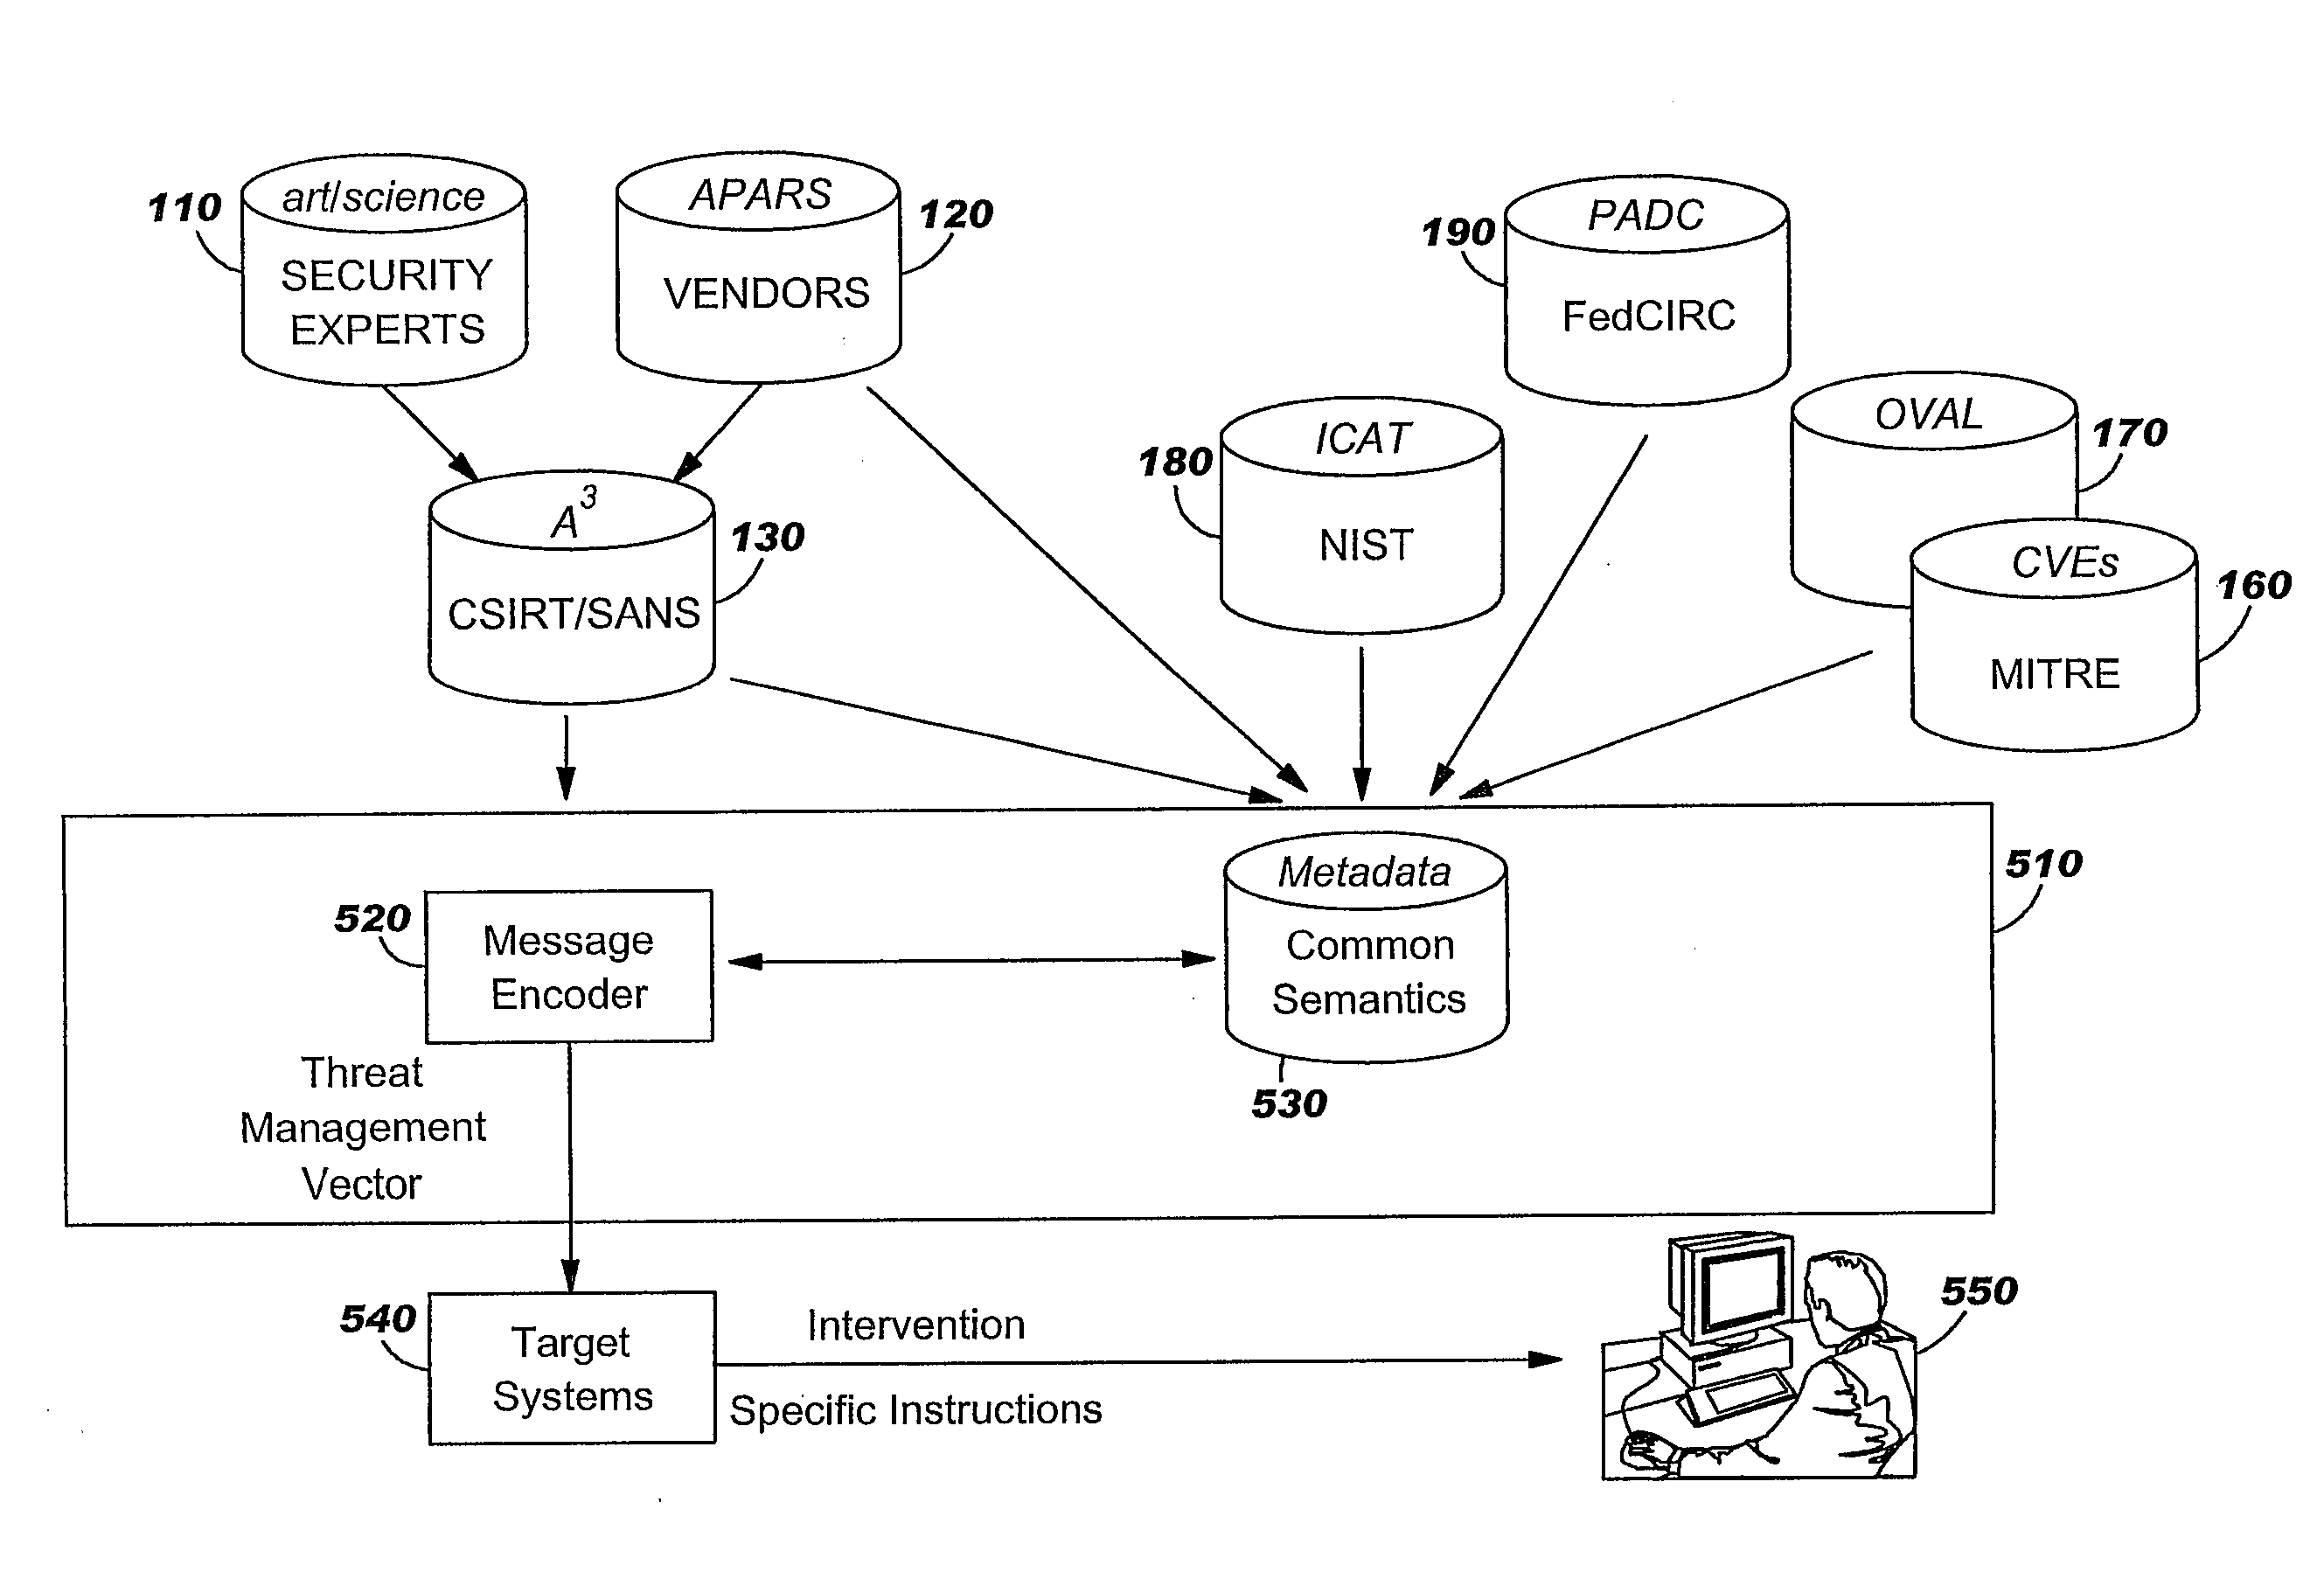 Method for Adminstration of Computer Security Threat Countermeasures to a Computer System